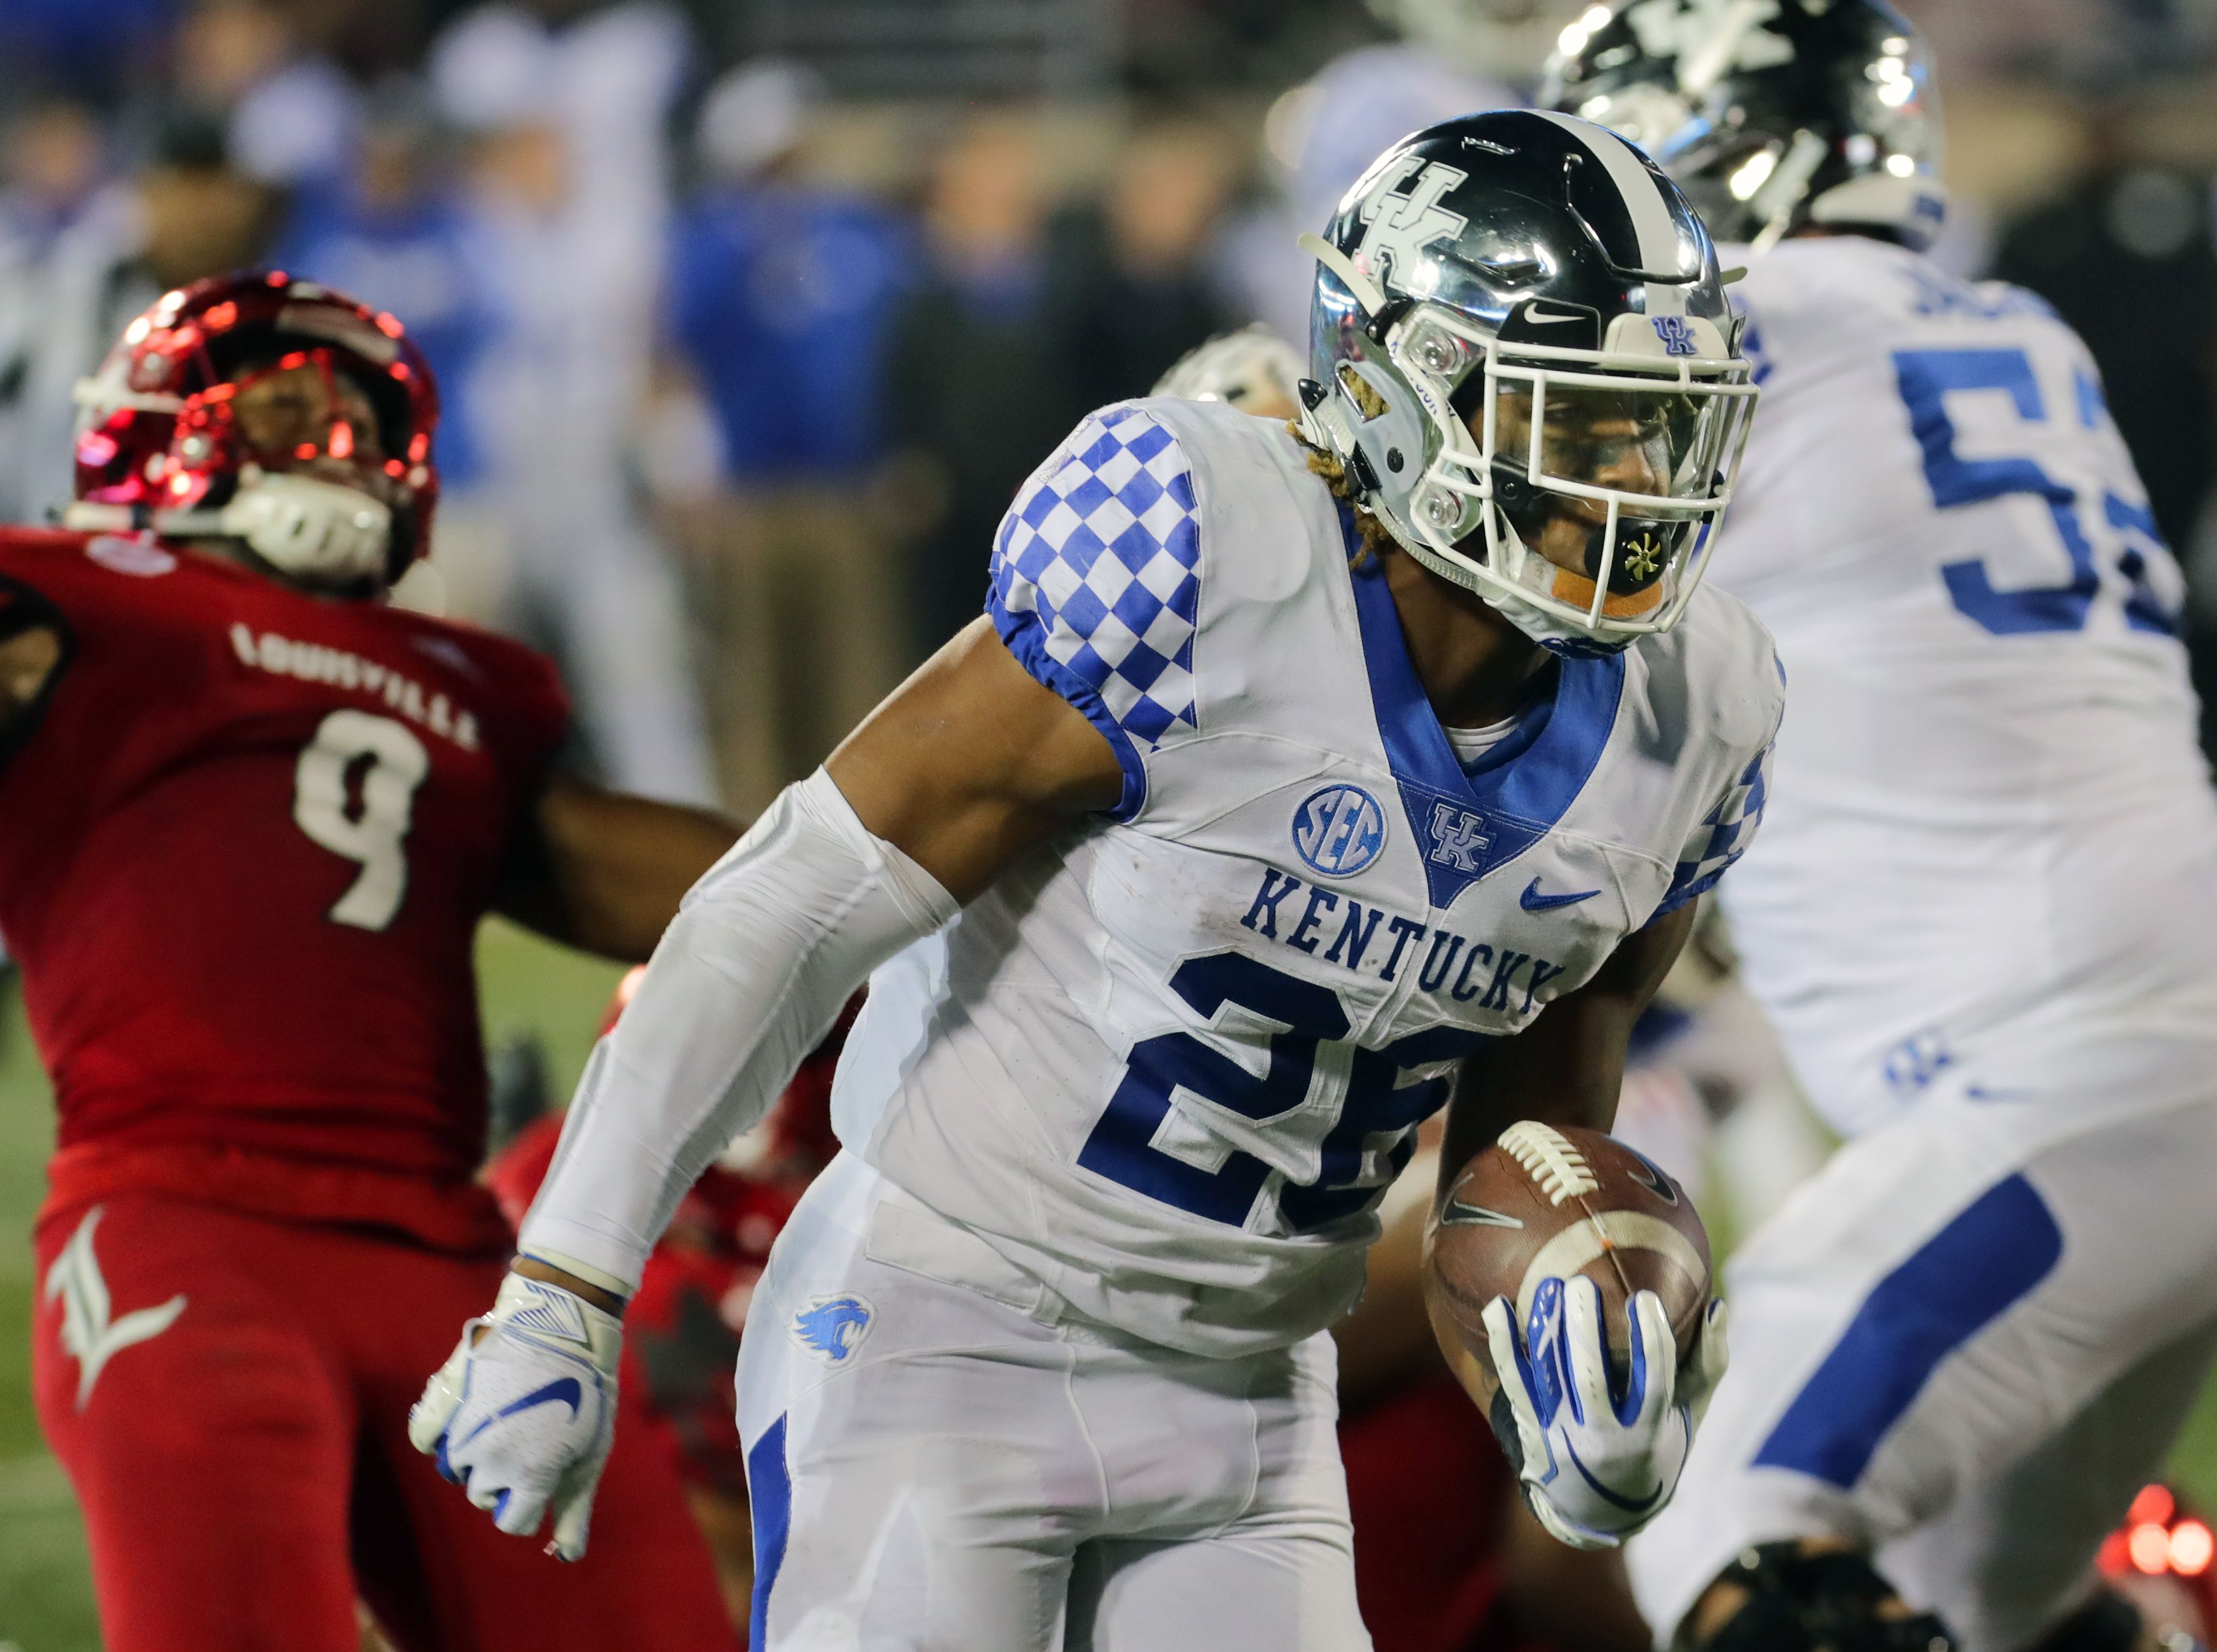 Kentucky vs. Louisville: Governor’s Cup 2018 live updates and scores | USA TODAY Sports